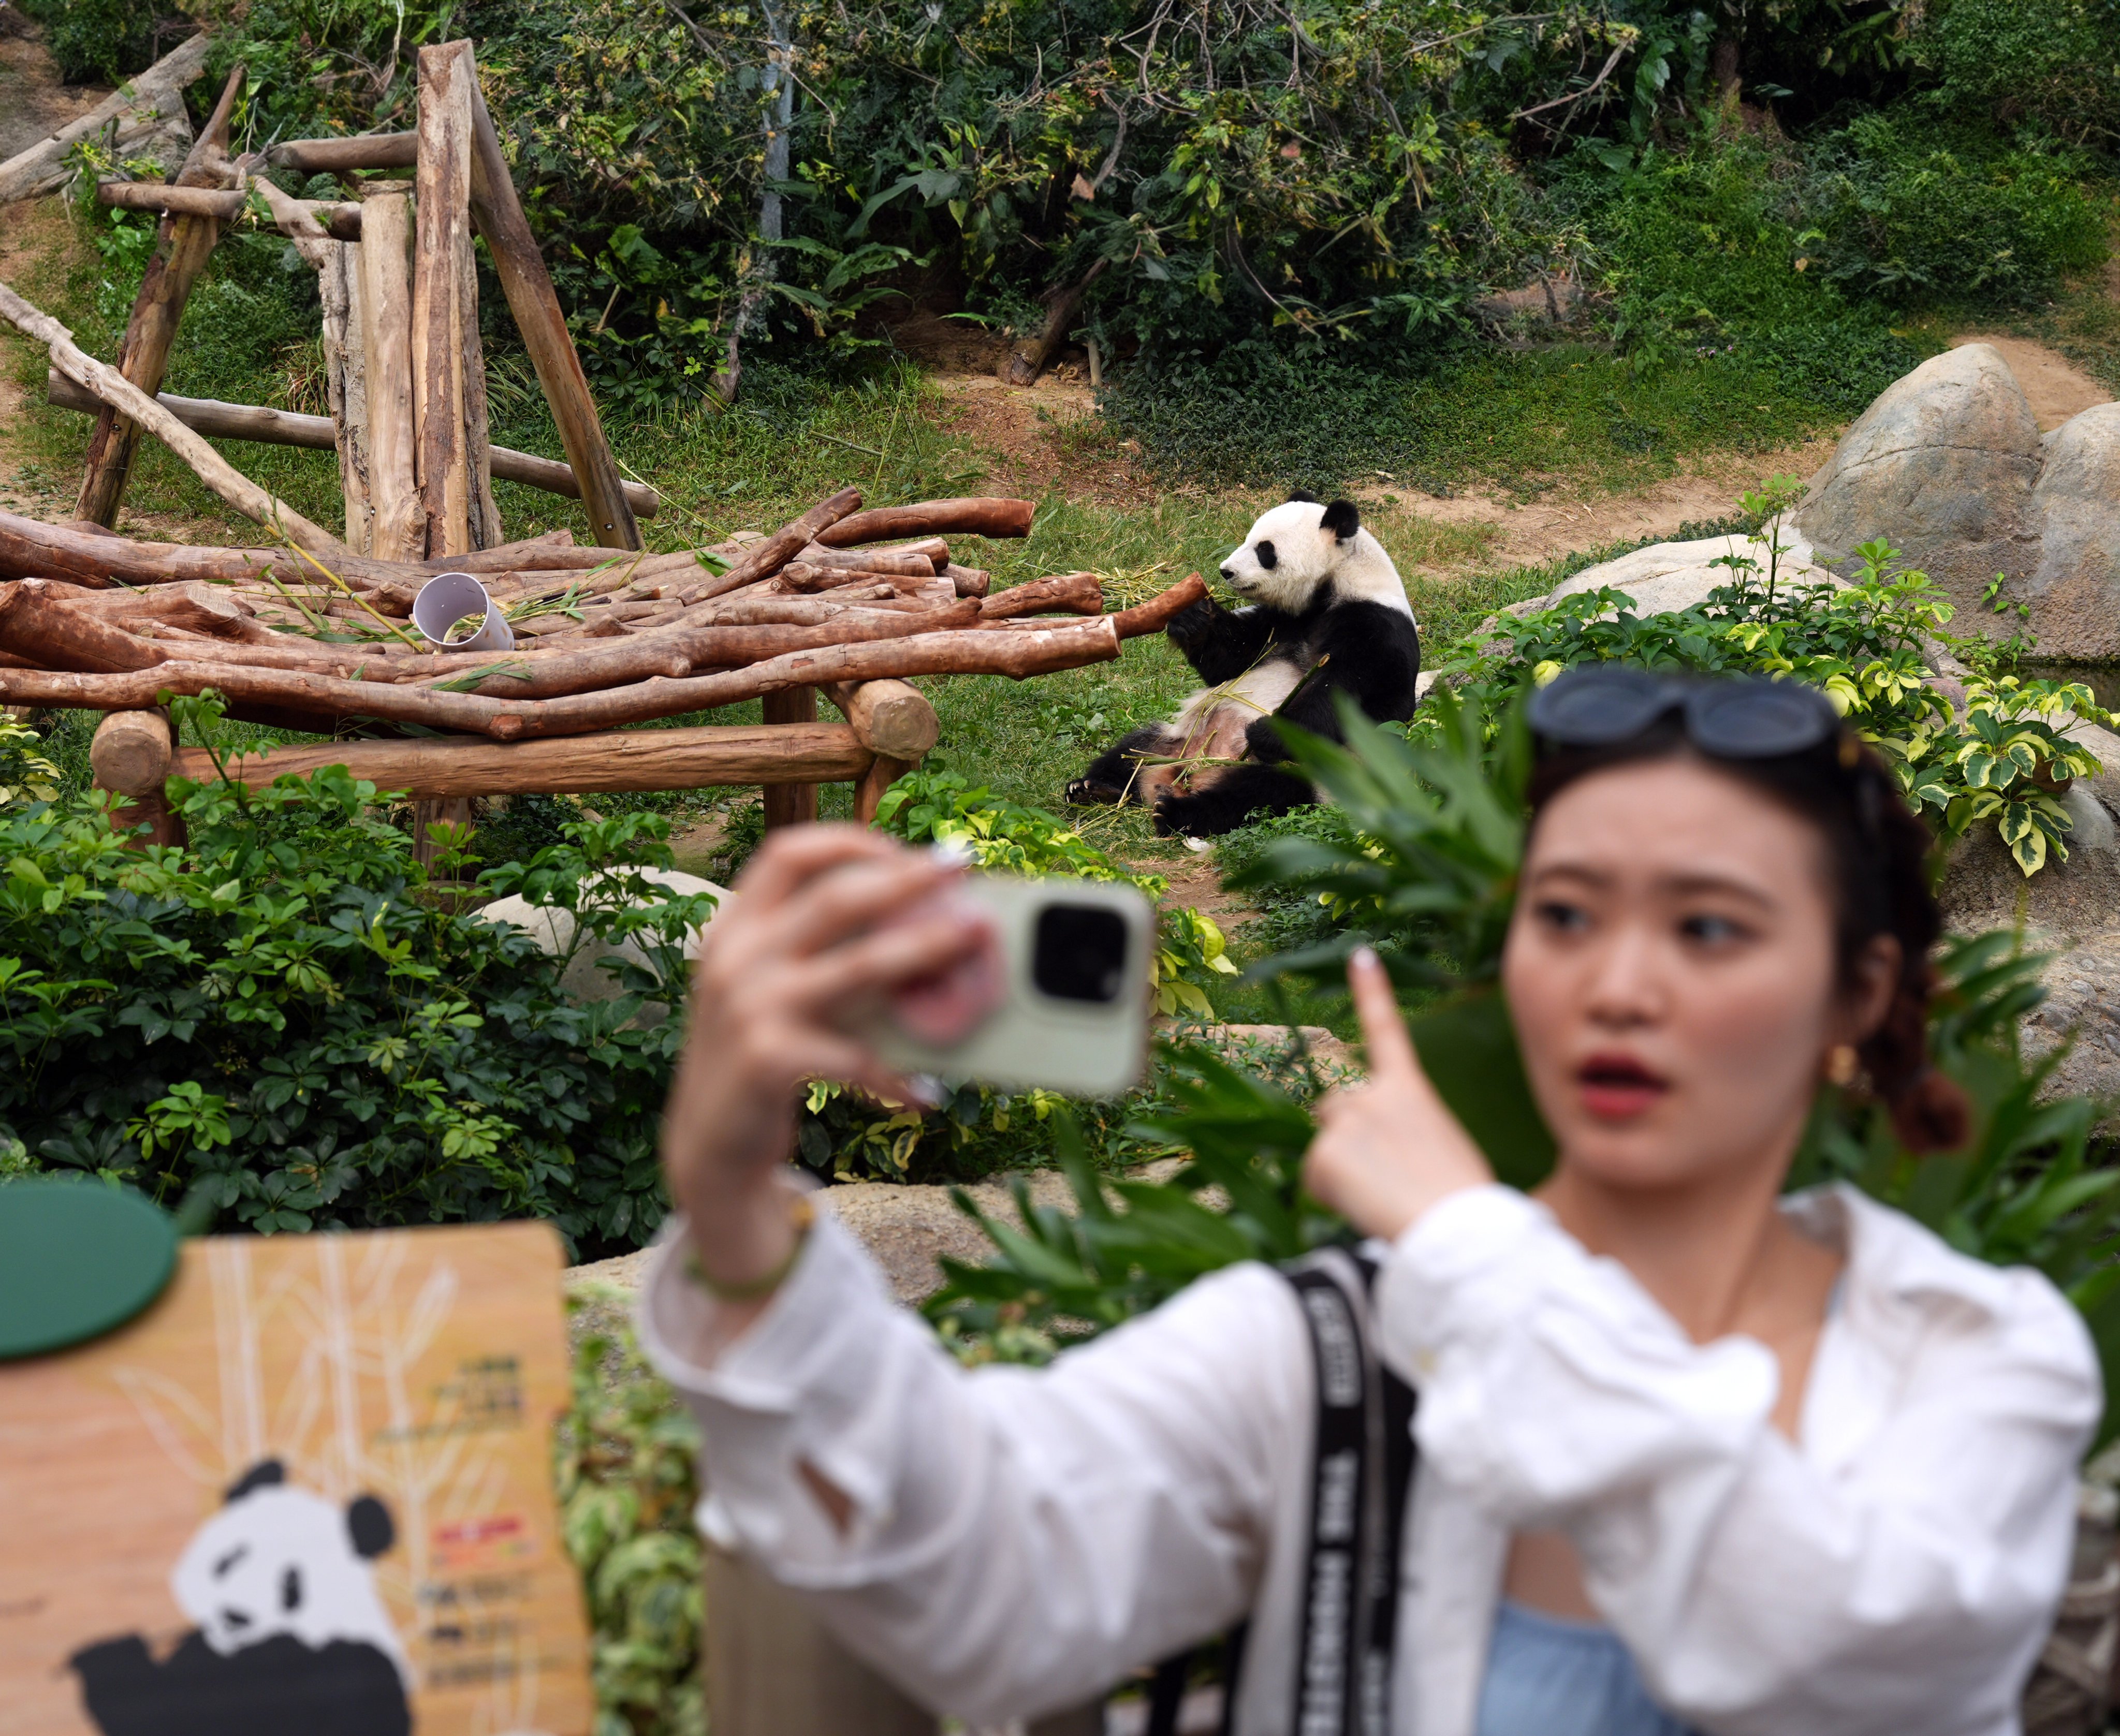 A visitor to Ocean Park snaps a photo with giant panda Ying Ying during the July 1 holiday. Photo: Eugene Lee